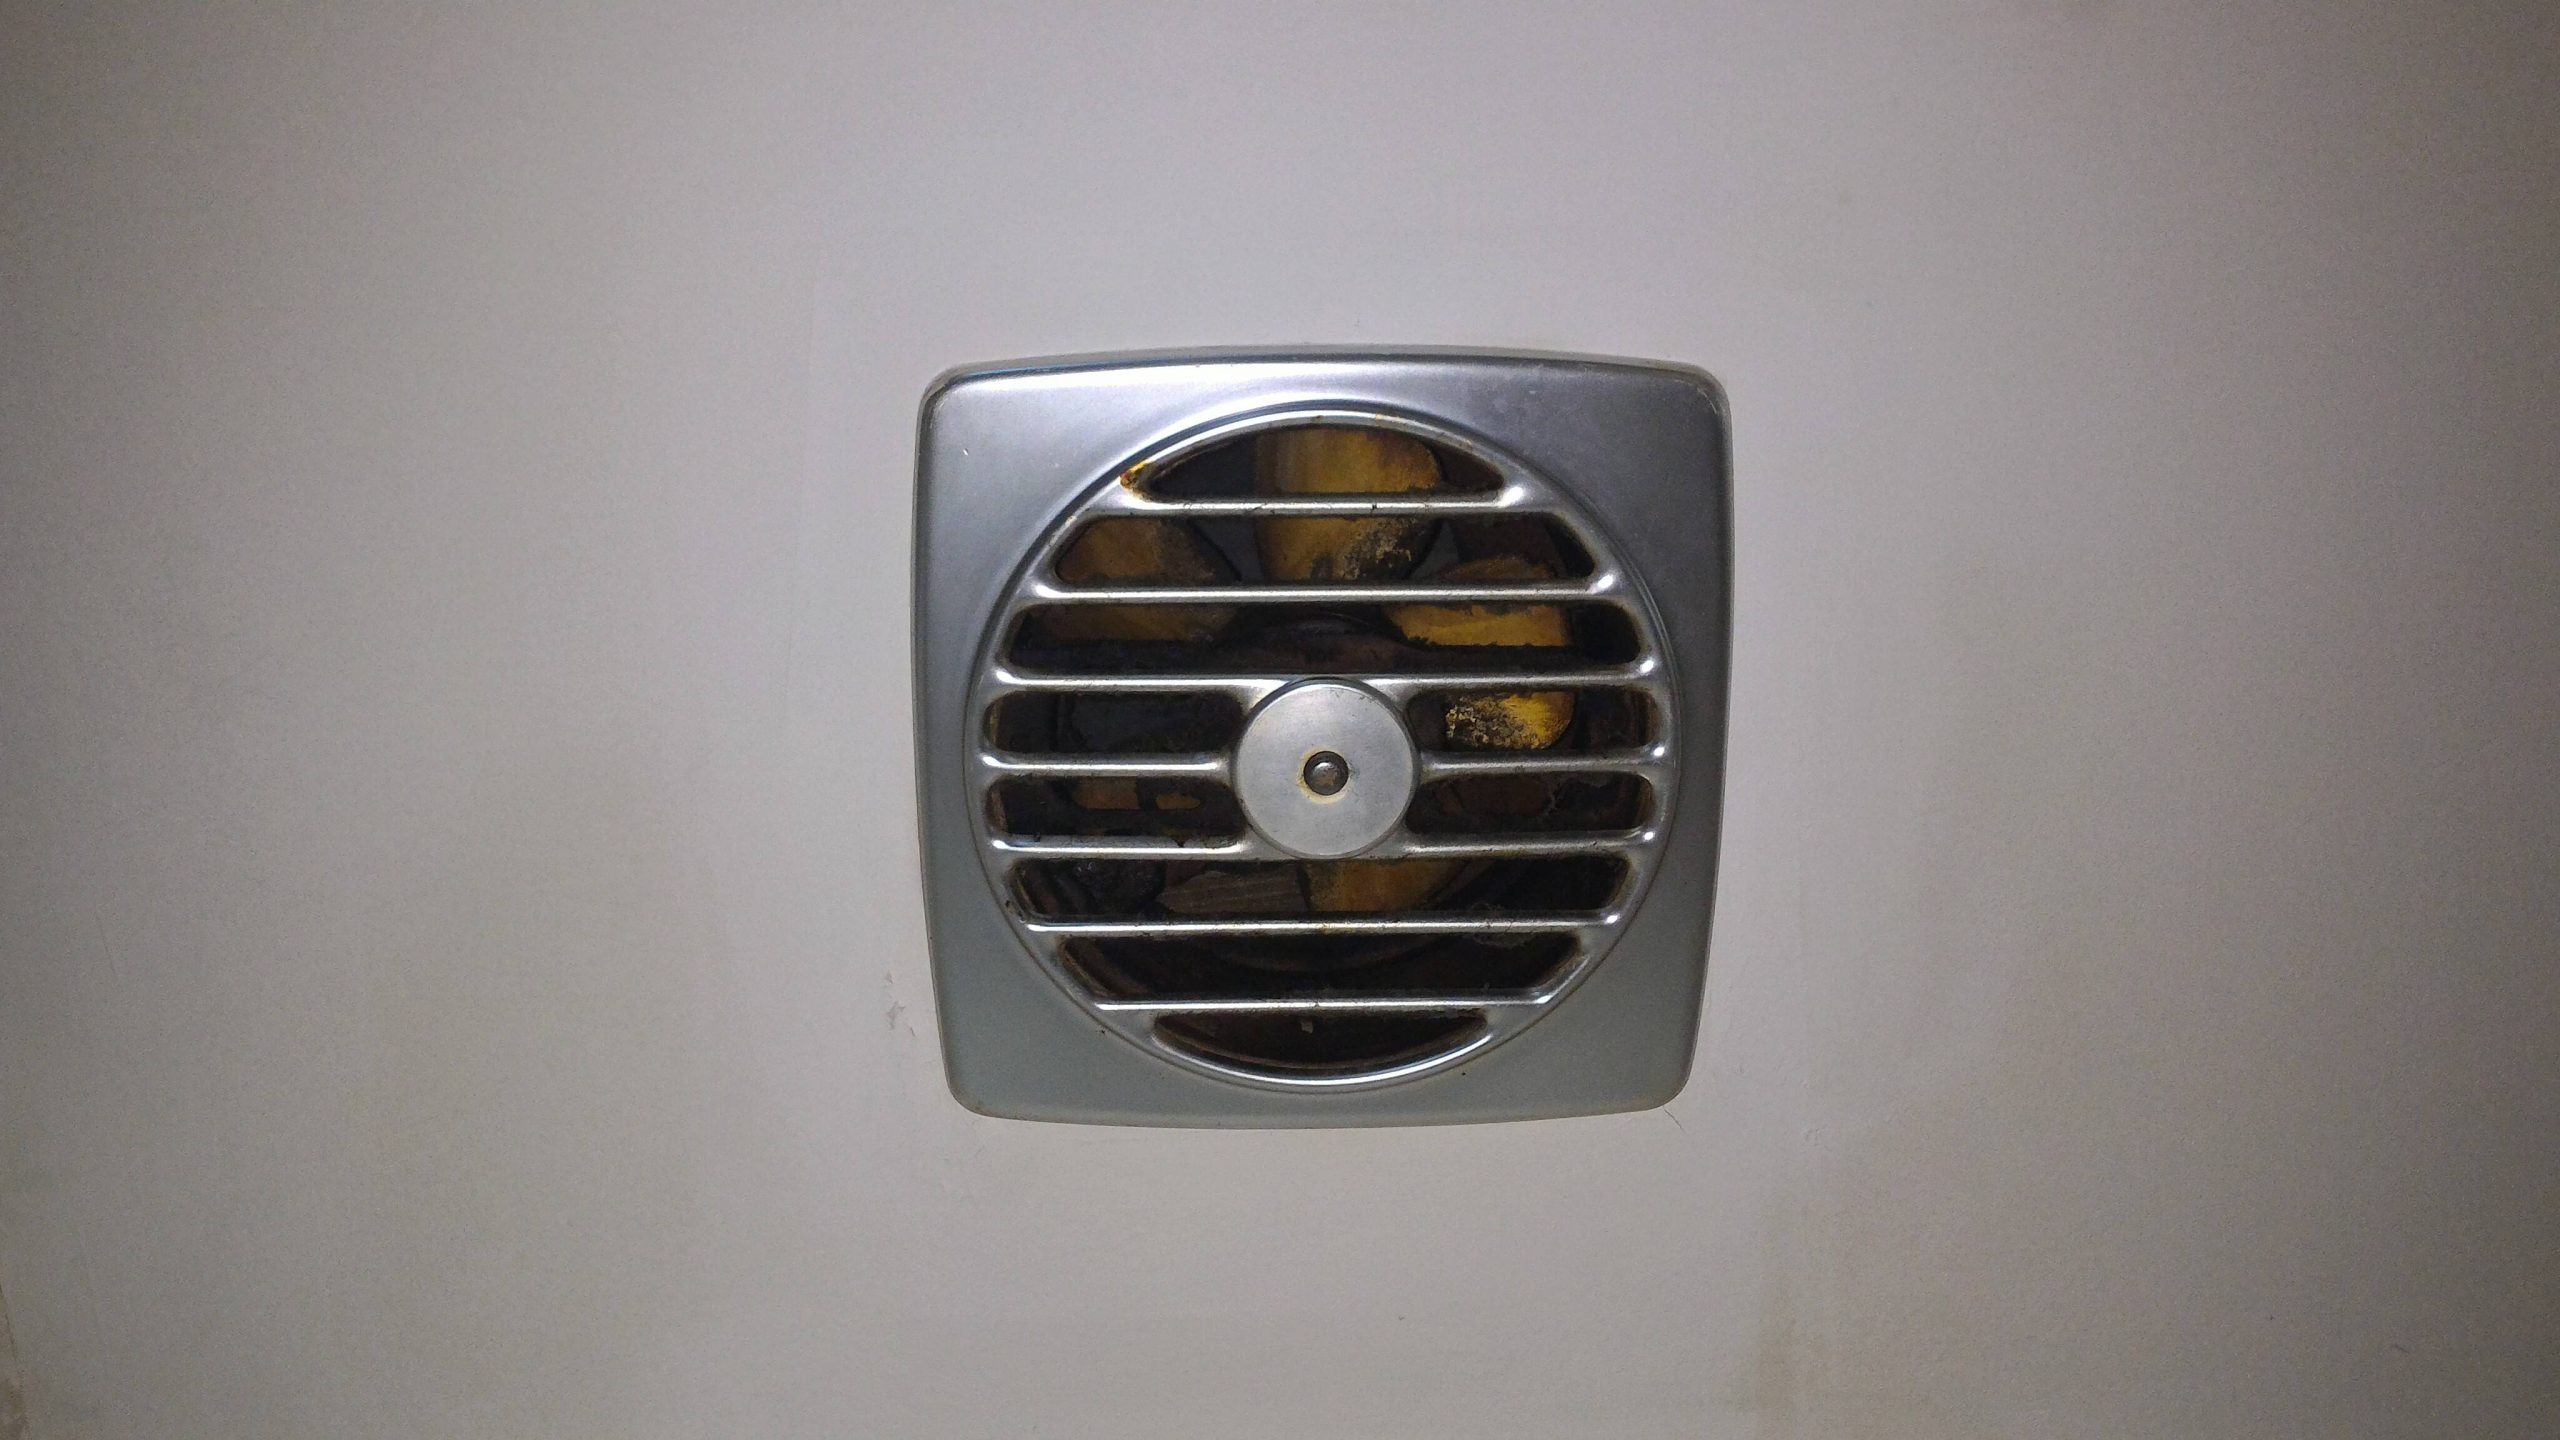 Ceiling Exhaust Fan In Kitchen Home Improvement Stack Exchange intended for proportions 4096 X 2304